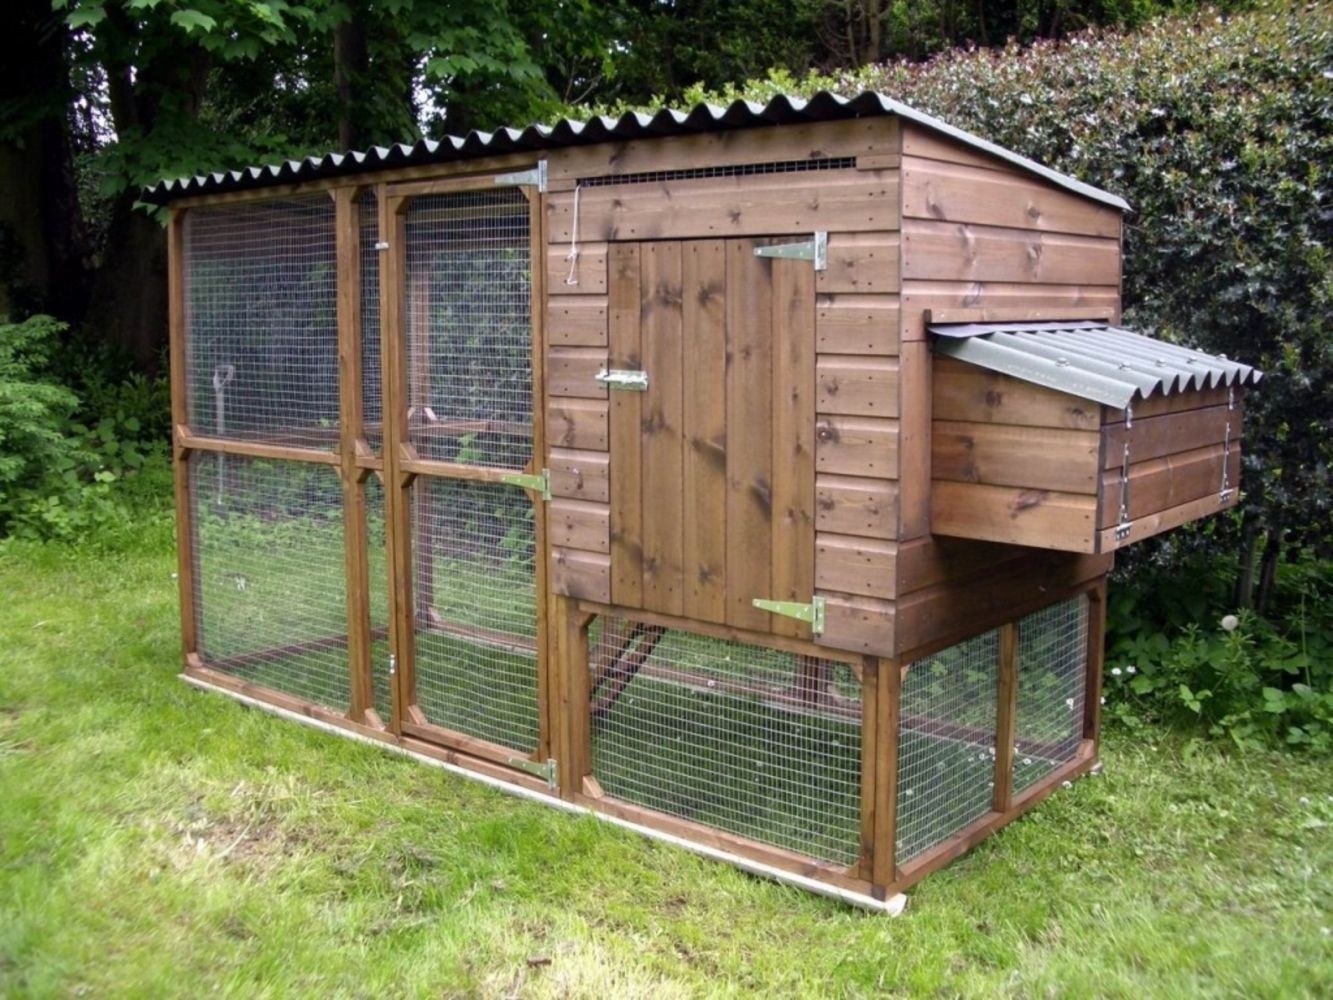 Chicken coop for 8 chickens